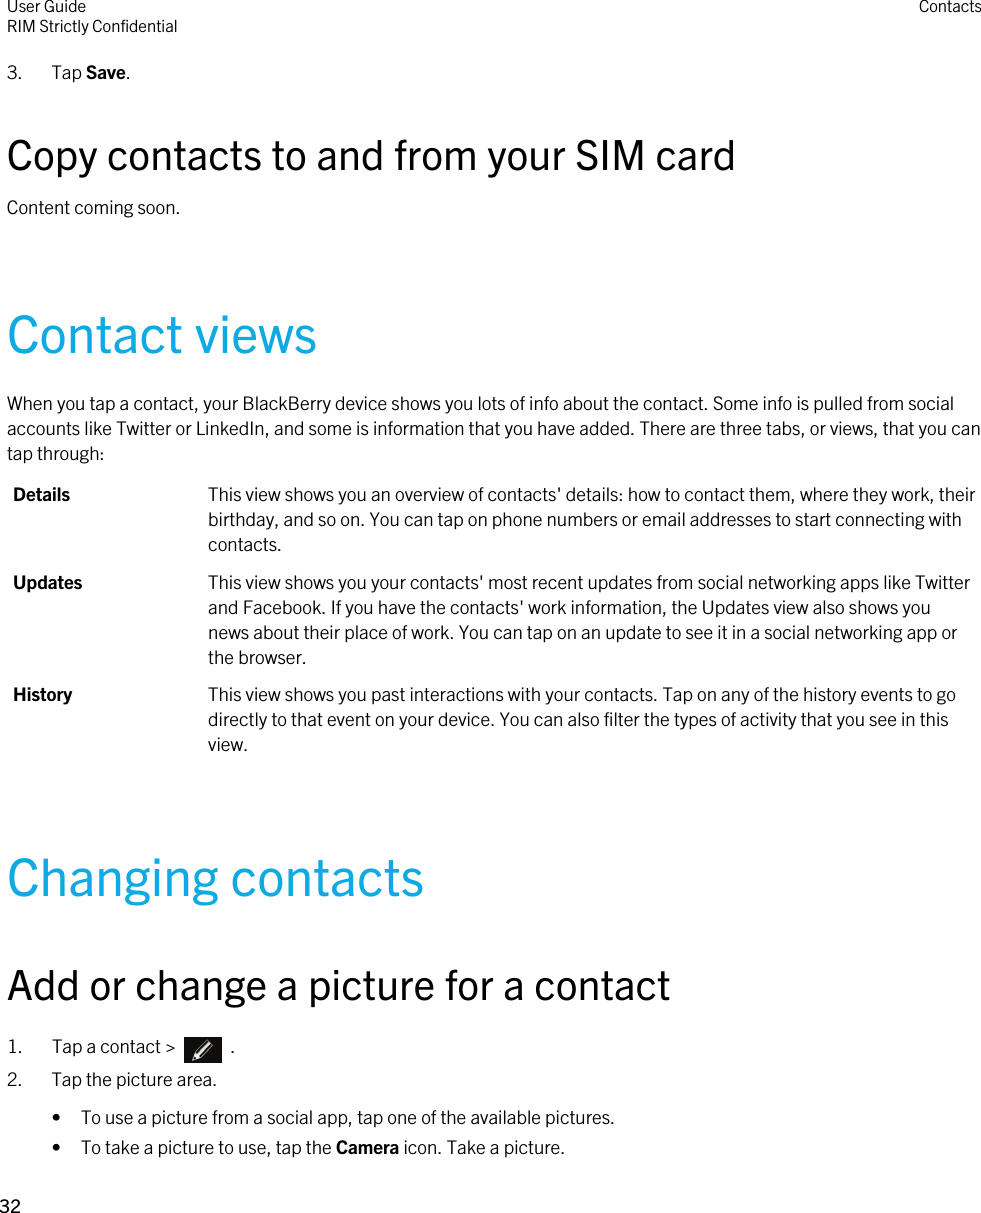 3. Tap Save.Copy contacts to and from your SIM cardContent coming soon.Contact viewsWhen you tap a contact, your BlackBerry device shows you lots of info about the contact. Some info is pulled from social accounts like Twitter or LinkedIn, and some is information that you have added. There are three tabs, or views, that you can tap through:Details This view shows you an overview of contacts&apos; details: how to contact them, where they work, their birthday, and so on. You can tap on phone numbers or email addresses to start connecting with contacts.Updates This view shows you your contacts&apos; most recent updates from social networking apps like Twitter and Facebook. If you have the contacts&apos; work information, the Updates view also shows you news about their place of work. You can tap on an update to see it in a social networking app or the browser.History This view shows you past interactions with your contacts. Tap on any of the history events to go directly to that event on your device. You can also filter the types of activity that you see in this view.Changing contactsAdd or change a picture for a contact1.  Tap a contact &gt;    .2. Tap the picture area.• To use a picture from a social app, tap one of the available pictures.• To take a picture to use, tap the Camera icon. Take a picture.User GuideRIM Strictly Confidential Contacts32 